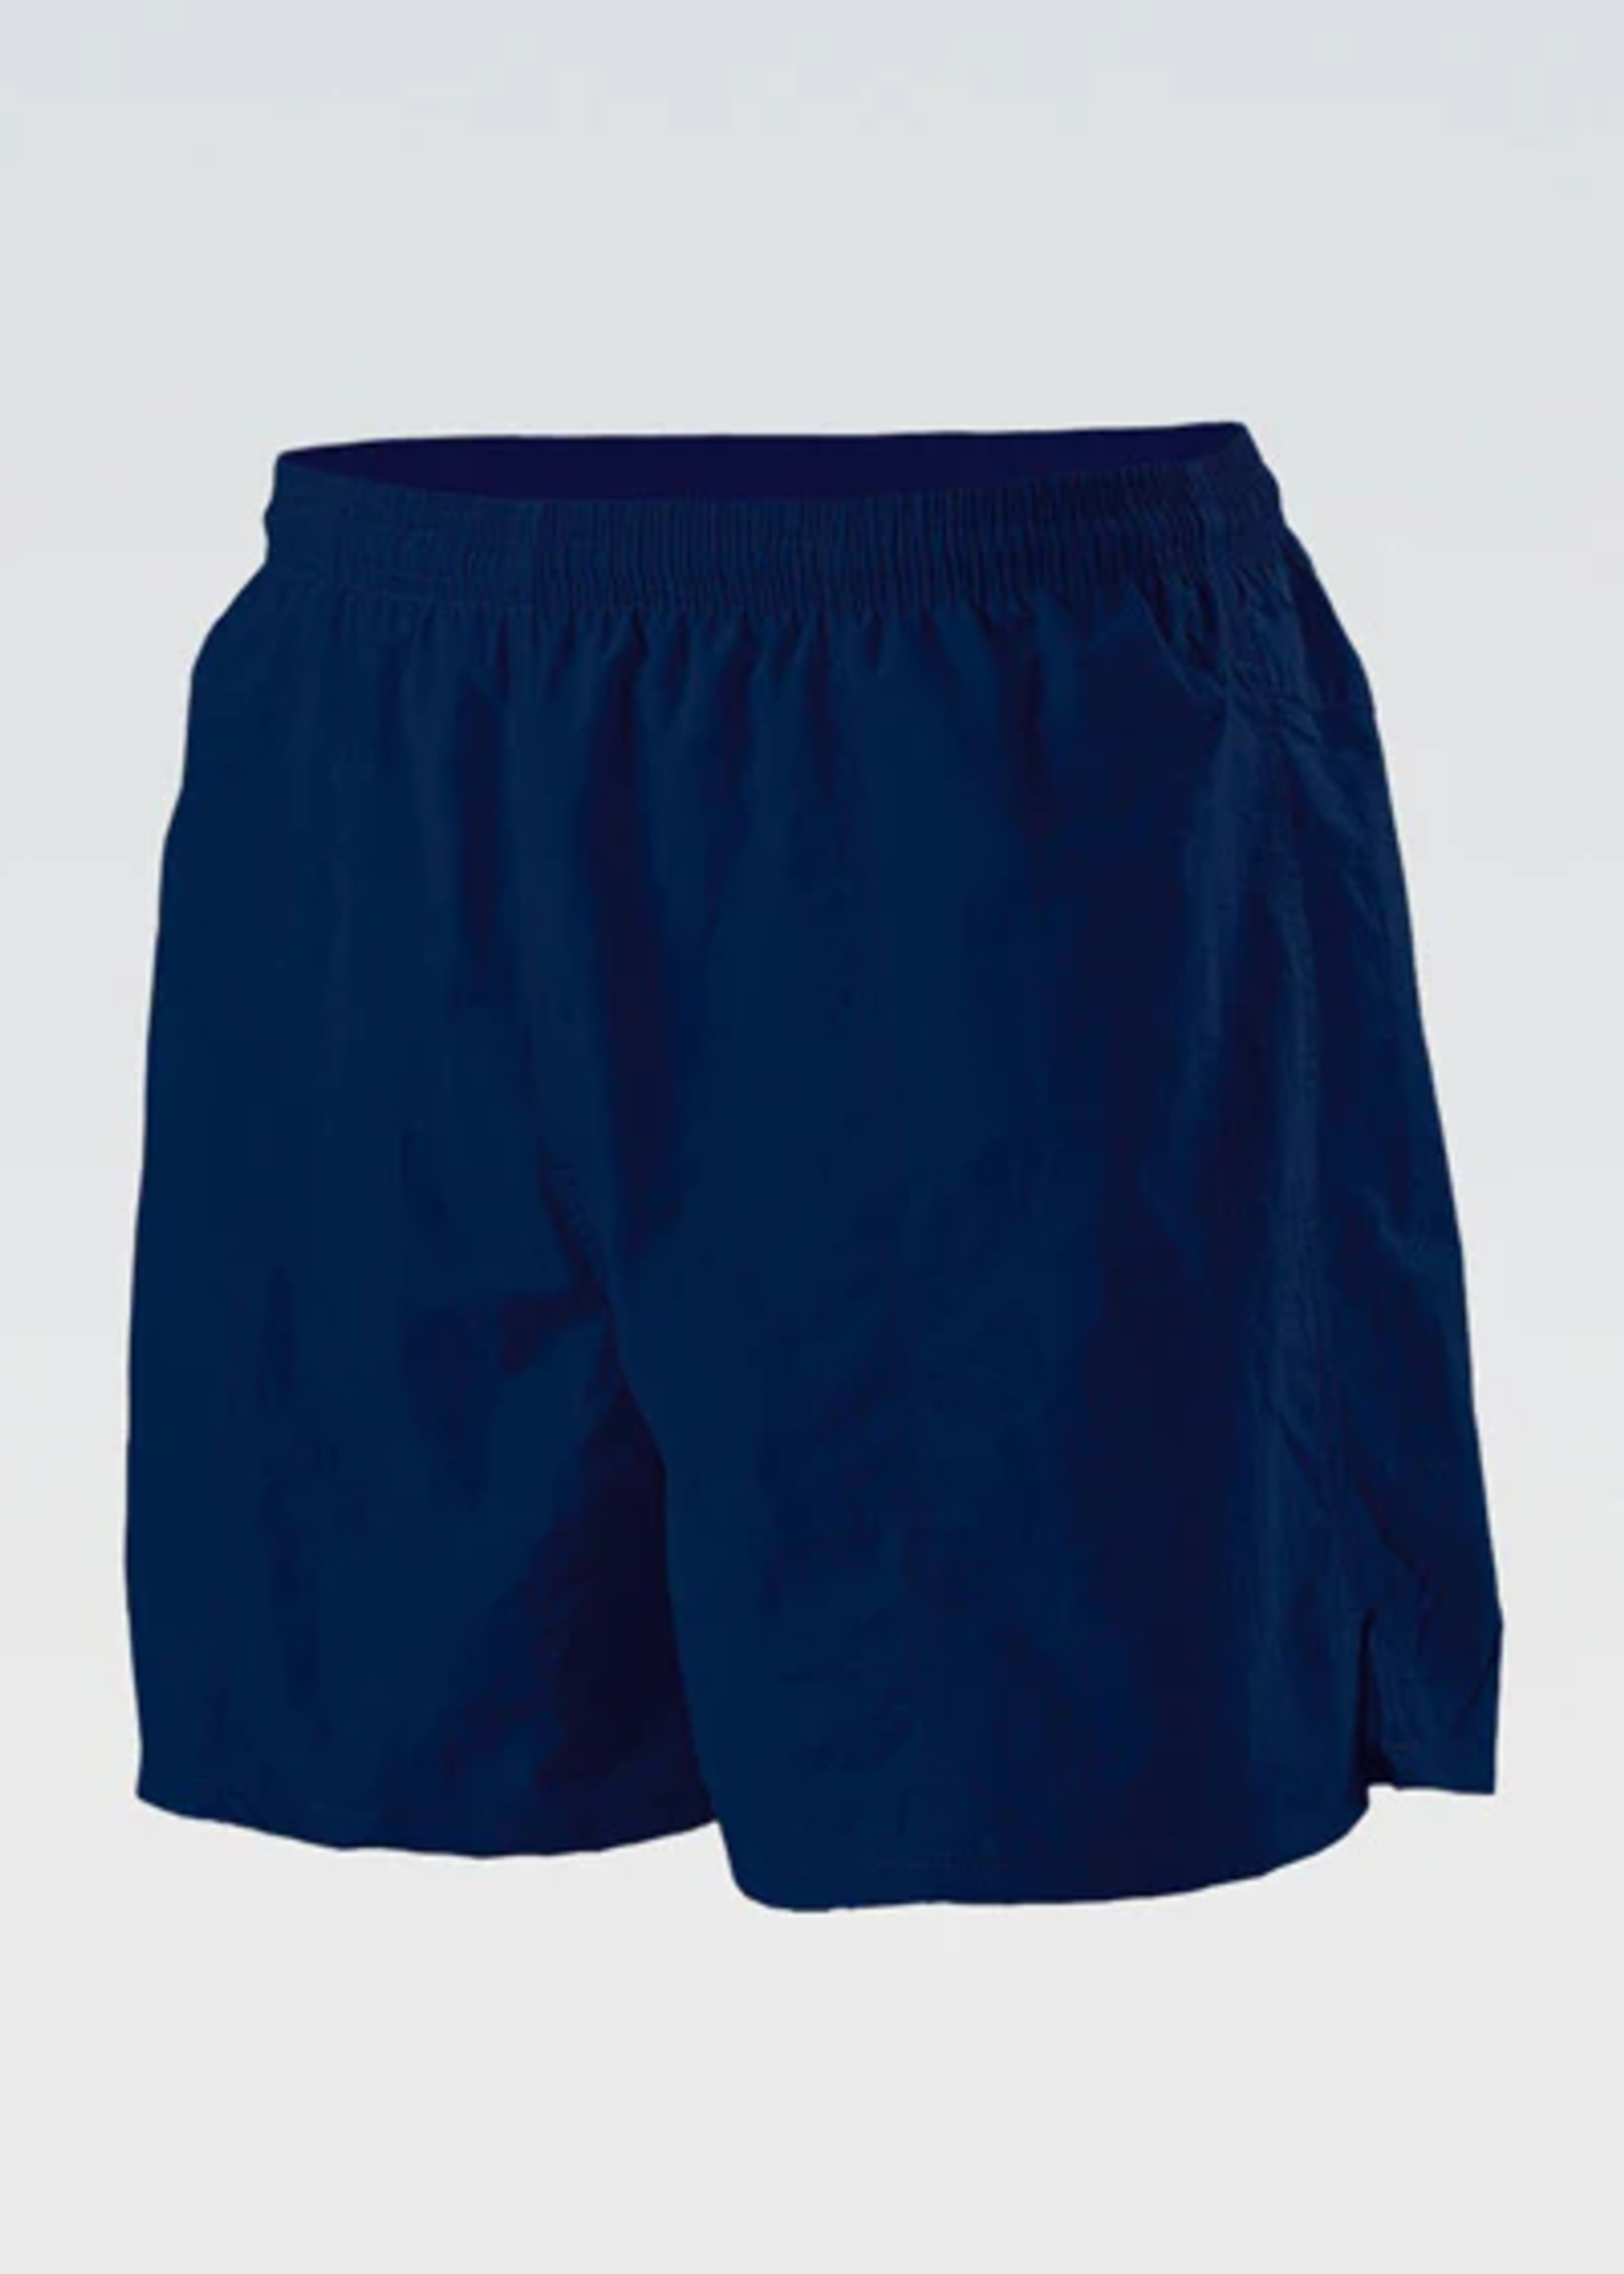 Solid 5 Inch Water Short 490 Navy